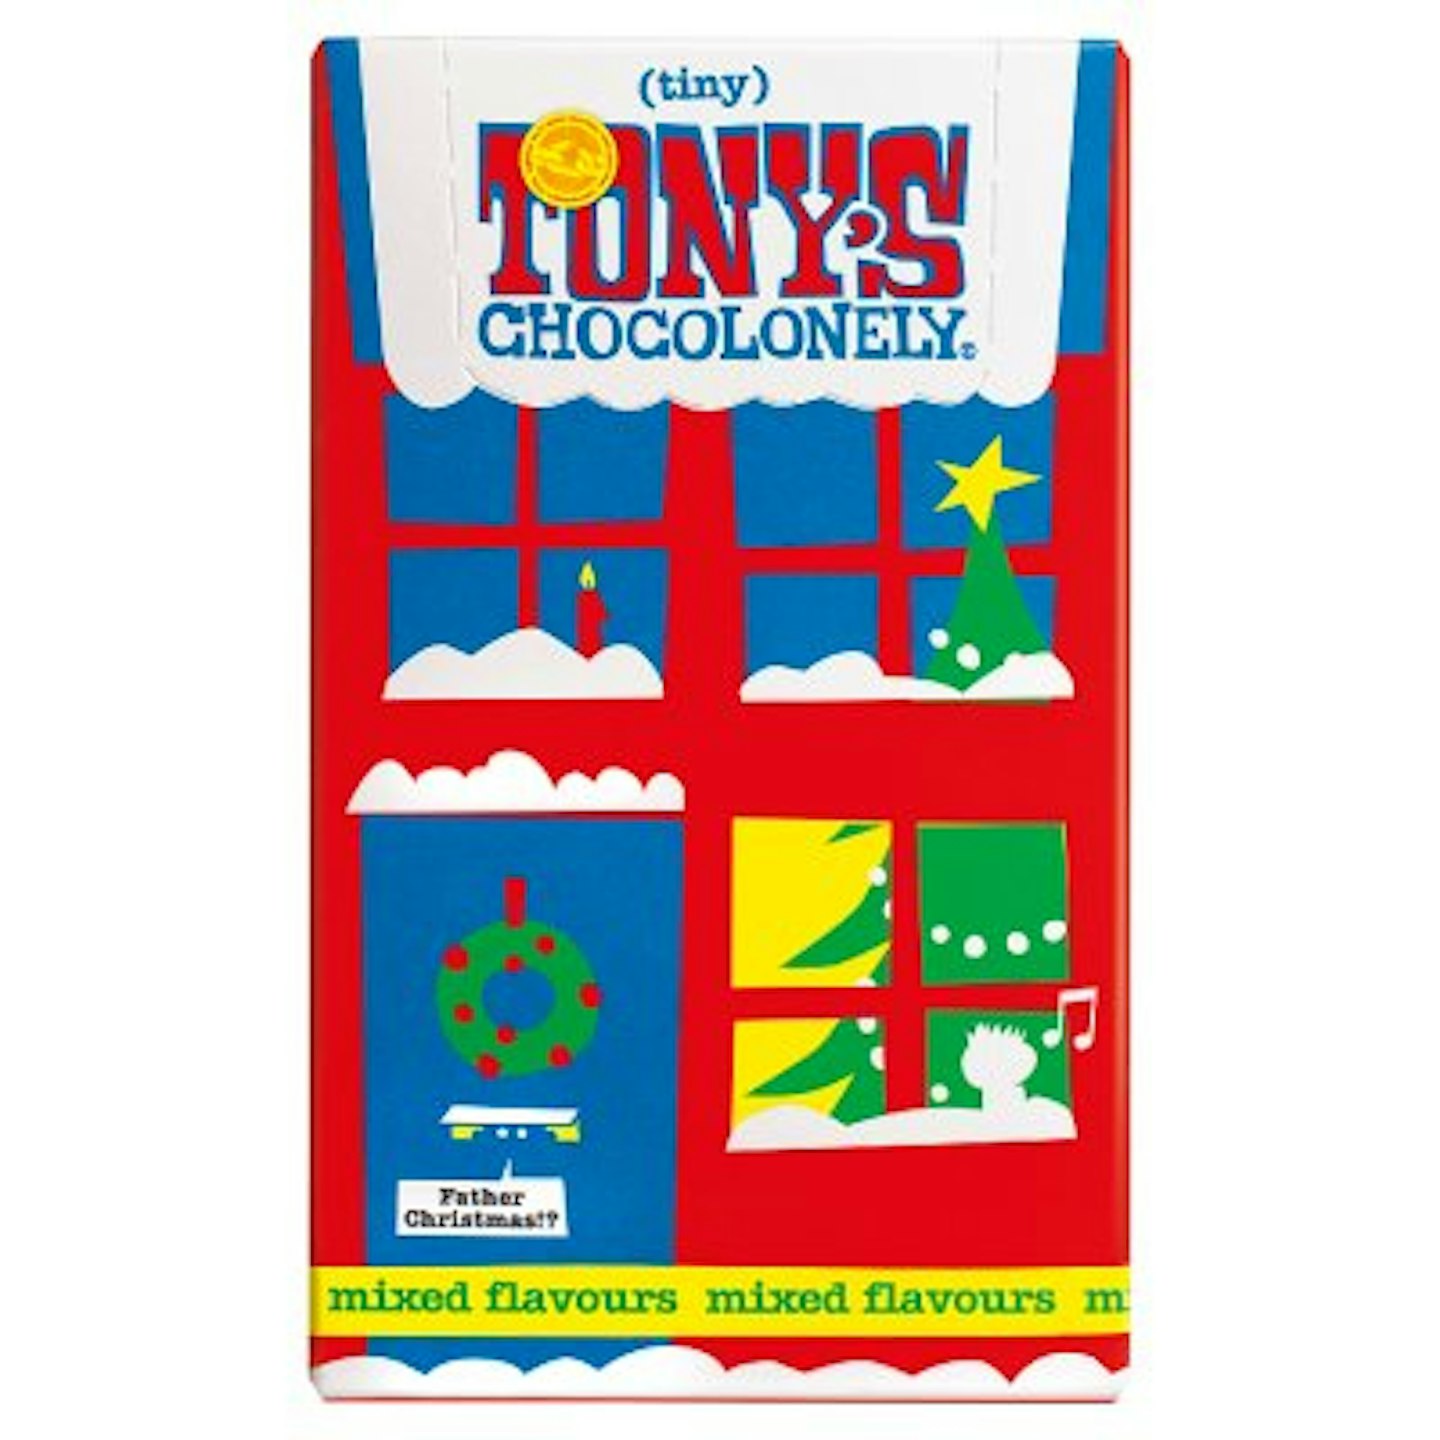 Tony's Chocolonely - small gifts for mum